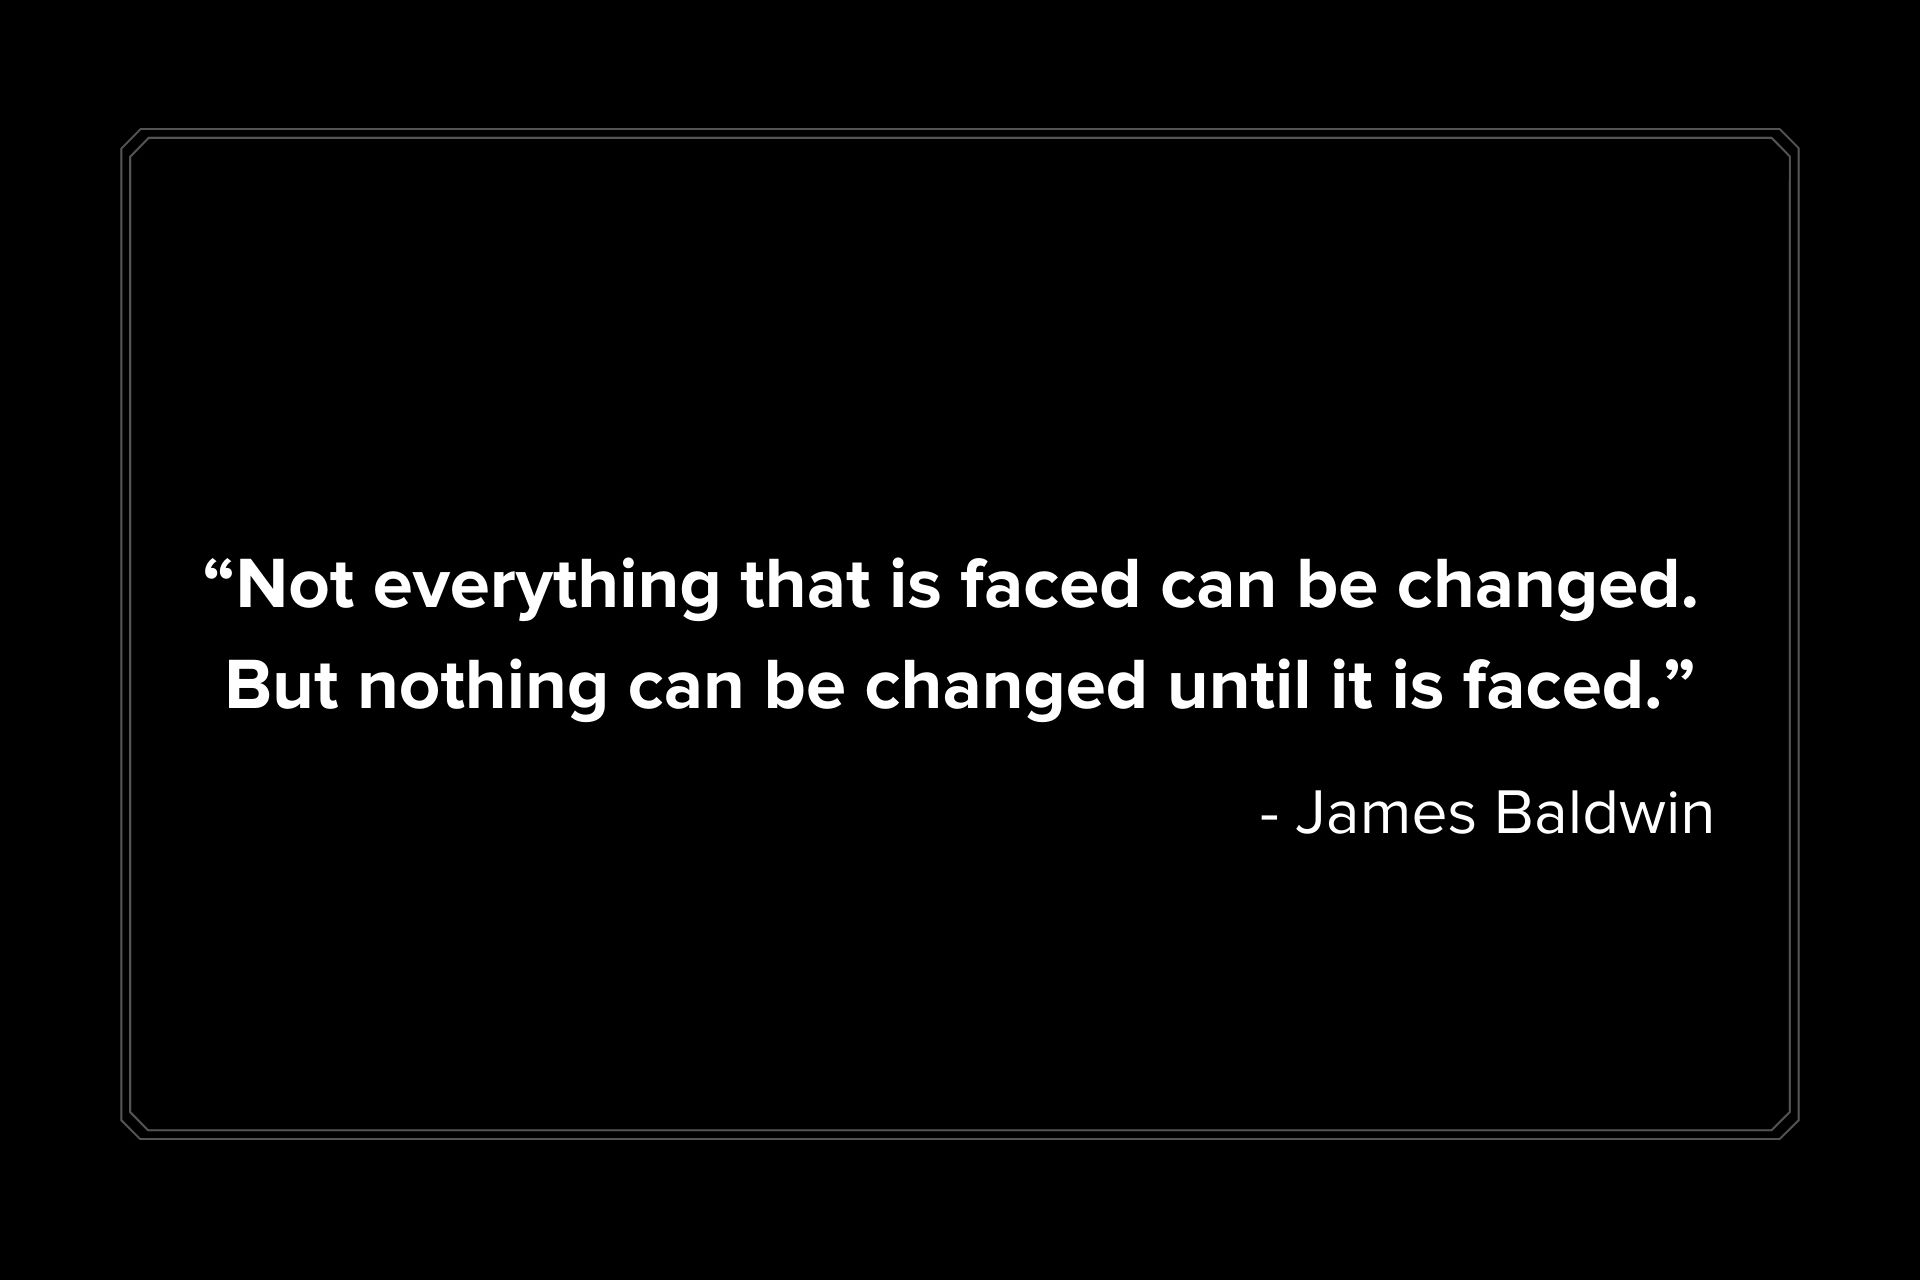 "Not everything that is faced can be changed. But nothing can be changed until it is faced." James Baldwin